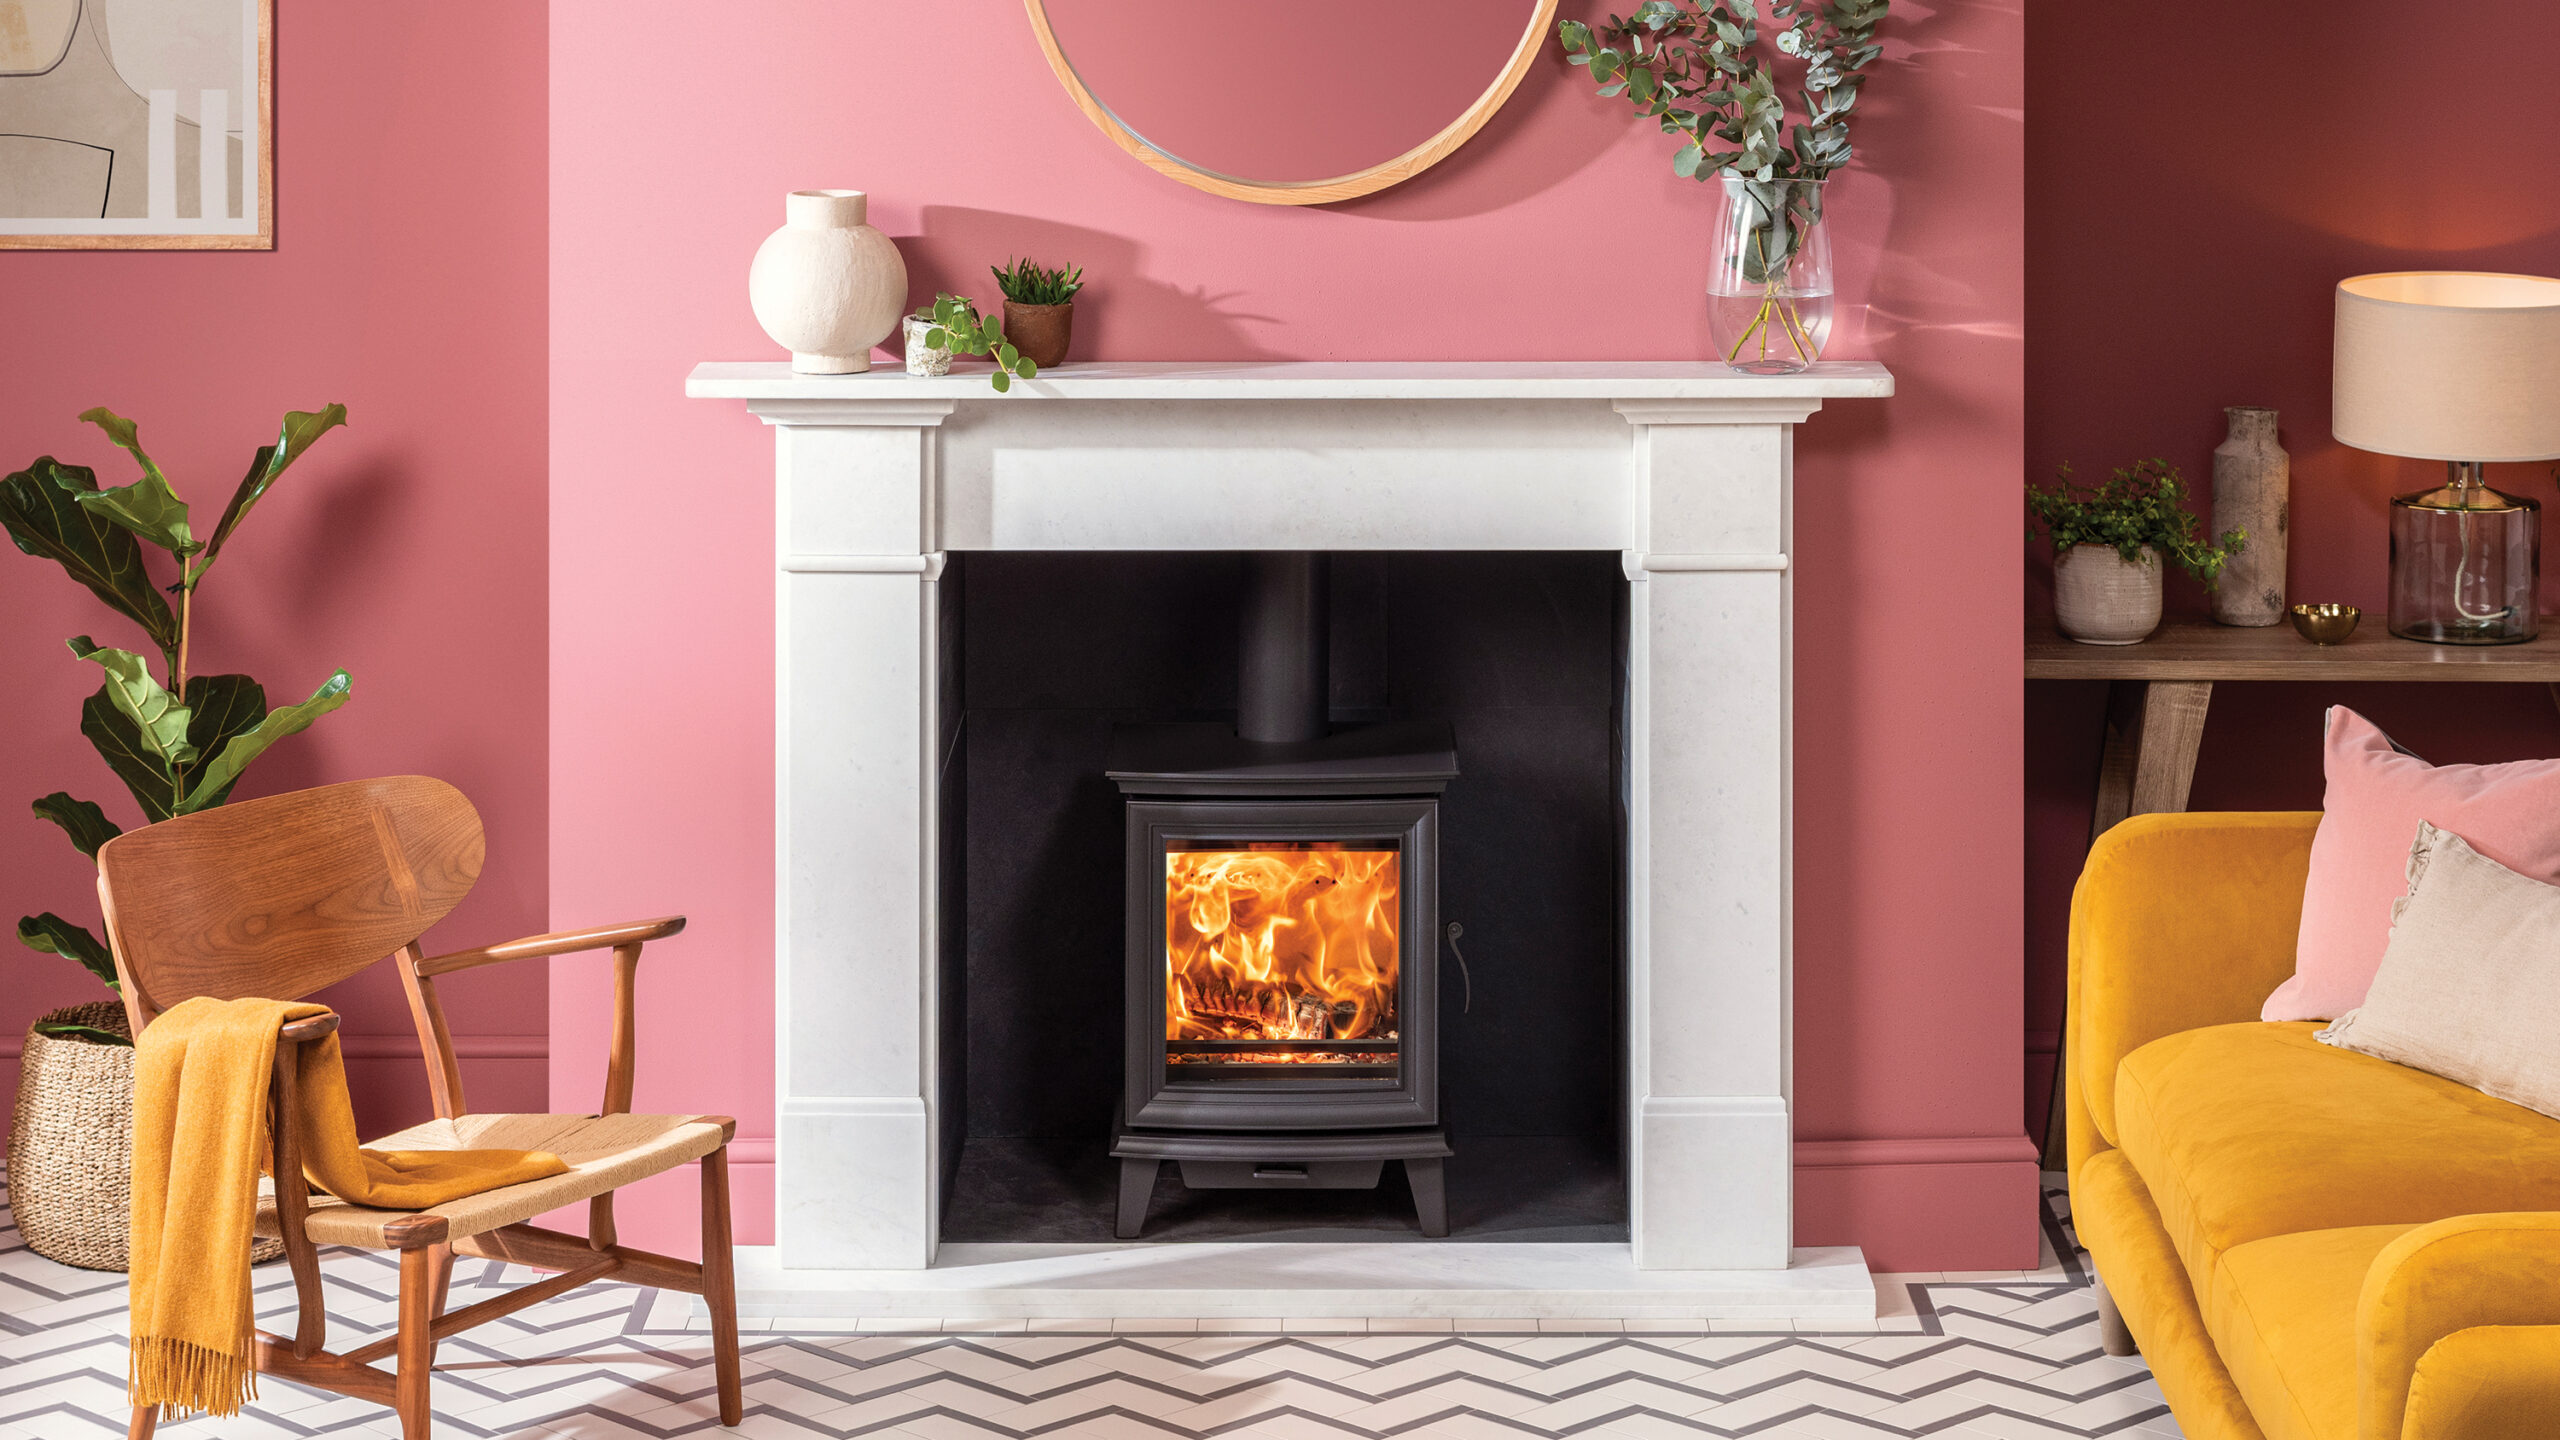 Attractive wood burning stove Available styles and designs of wood burning stoves